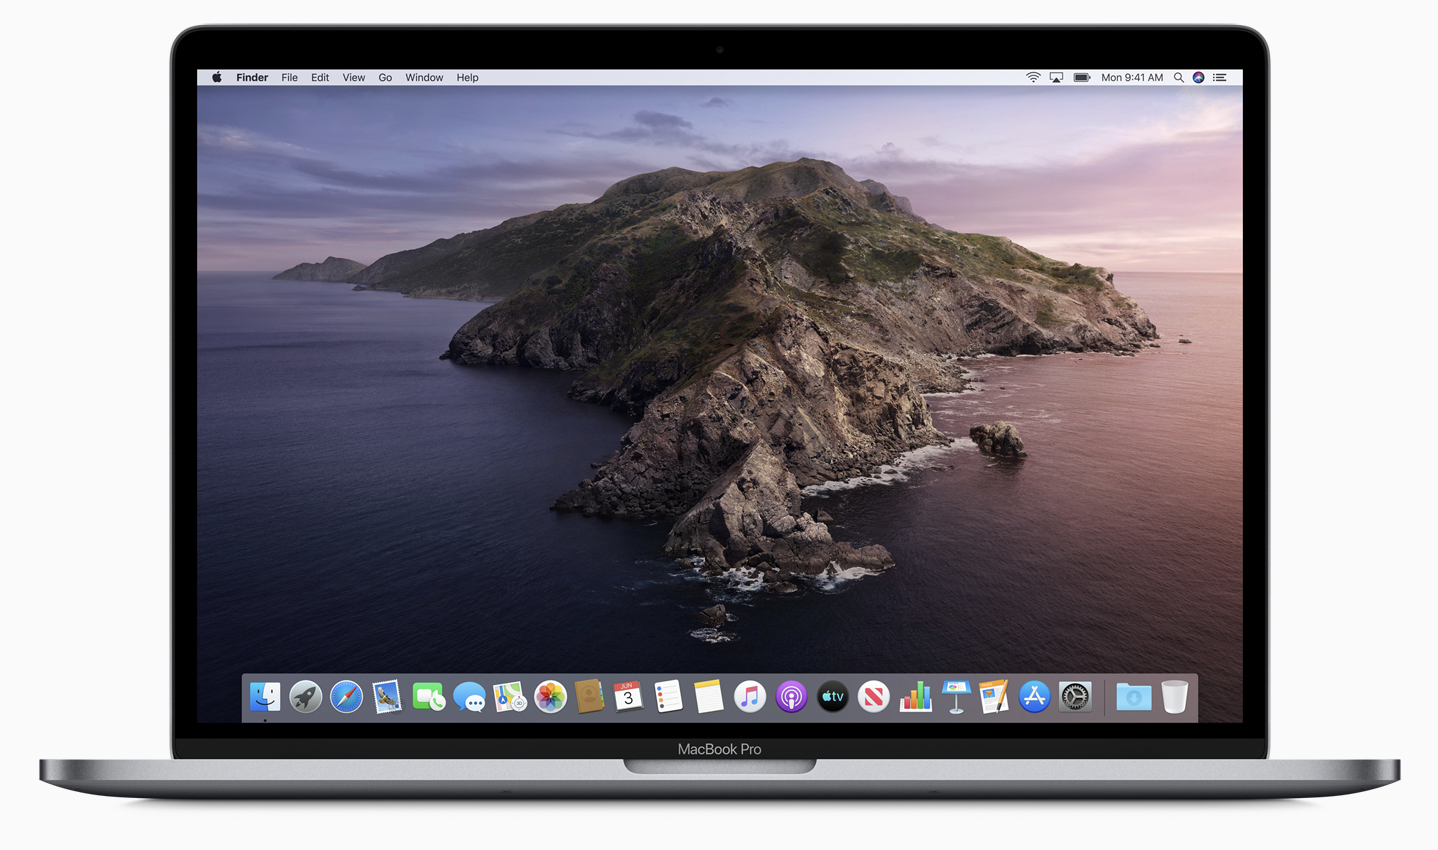 Apple releases macOS Catalina 10.15.4 supplemental update, watch OS 6.2.1